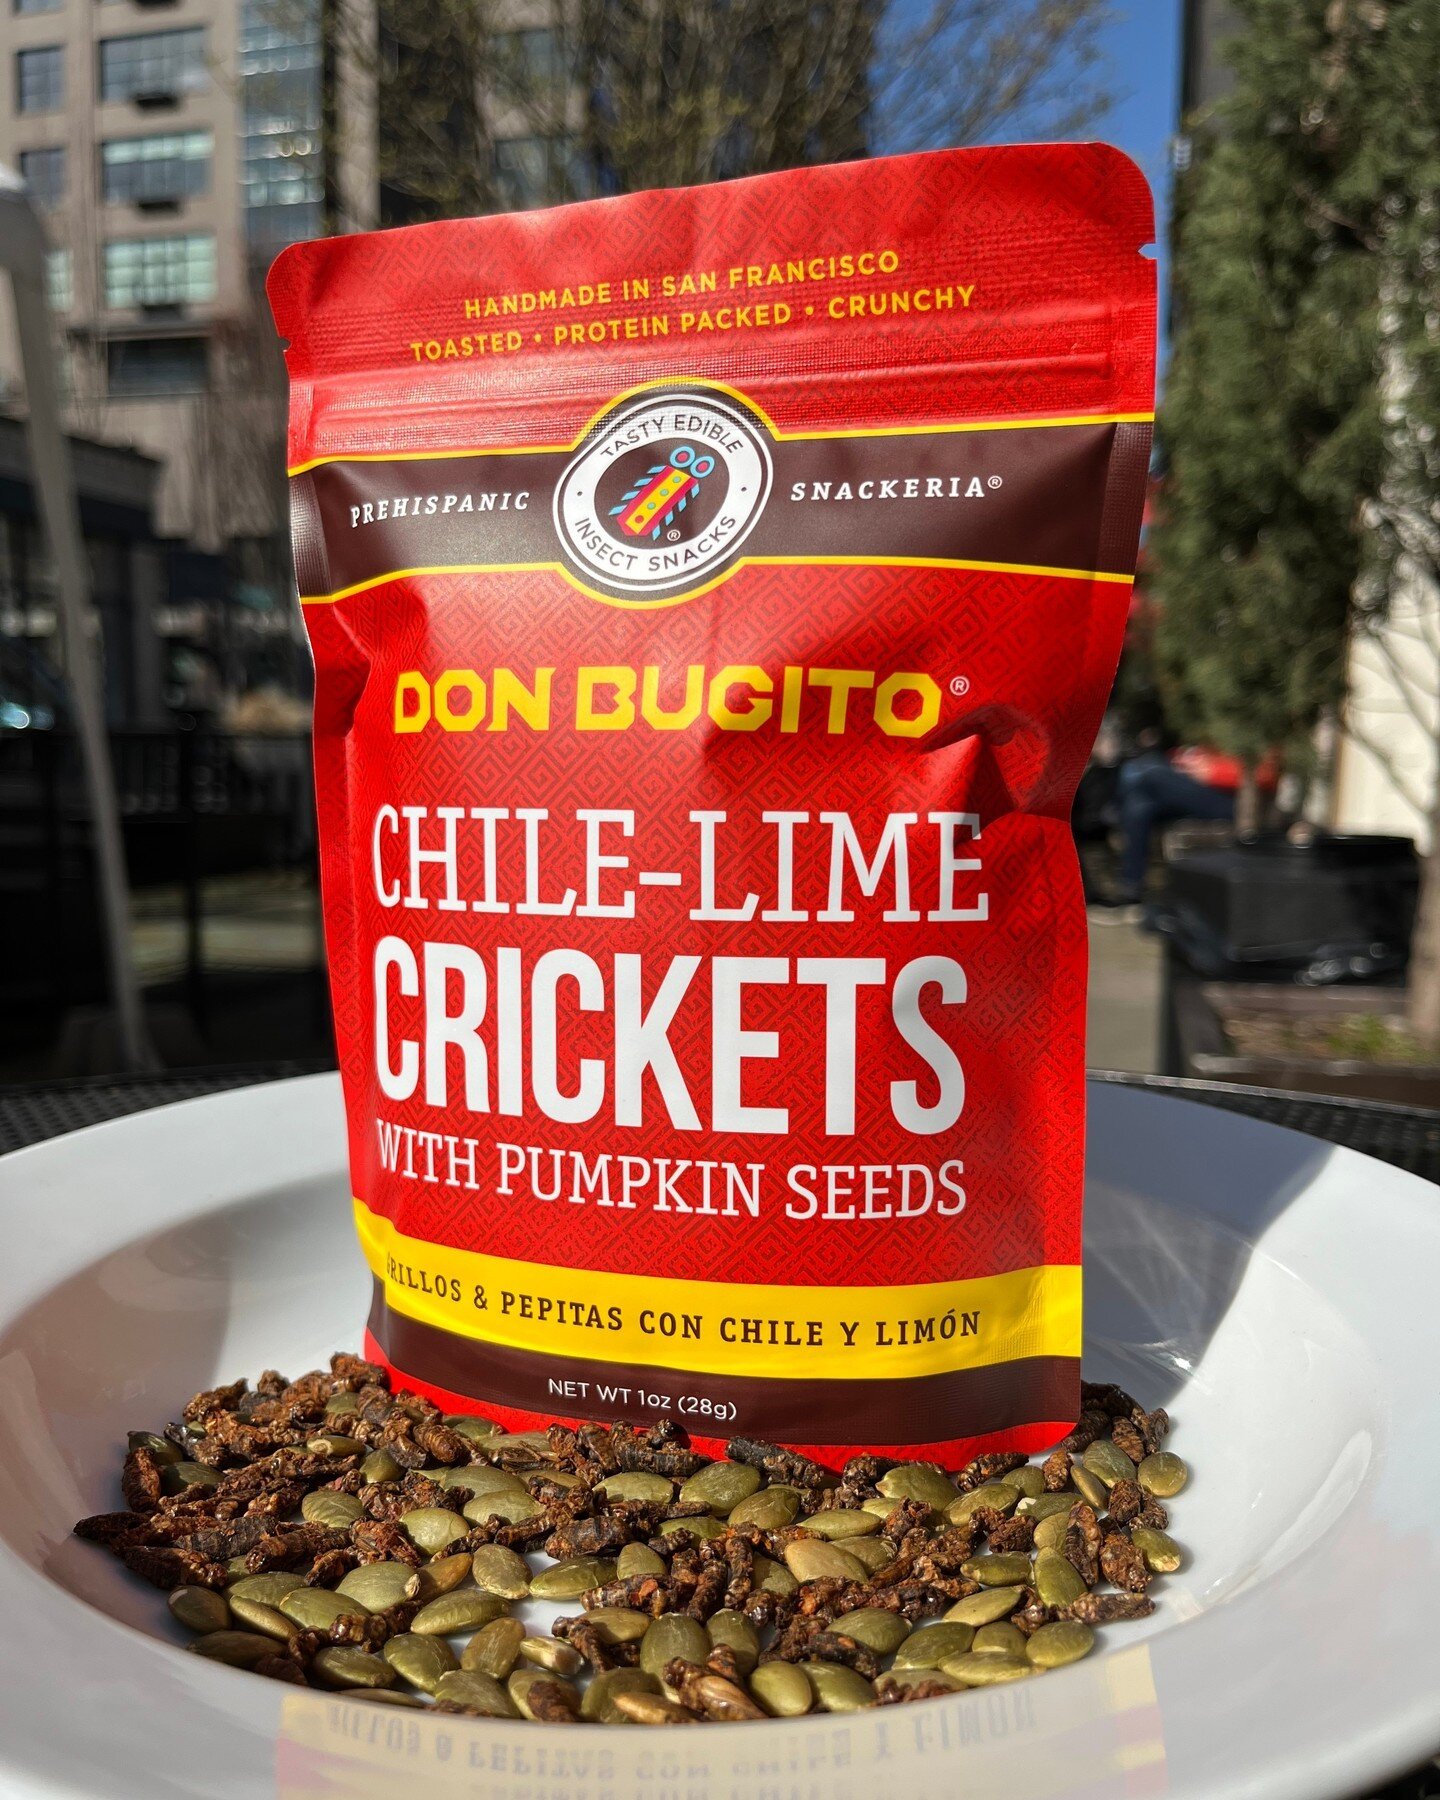 Our staff is raving over @donbugito chile-lime Crickets and pumpkin seeds. 🦗 Before you bug out, Crickets are a great low-calorie source of protein, omega fatty acids, and fiber-- plus, they're sustainable! Did you know that eating Crickets and othe